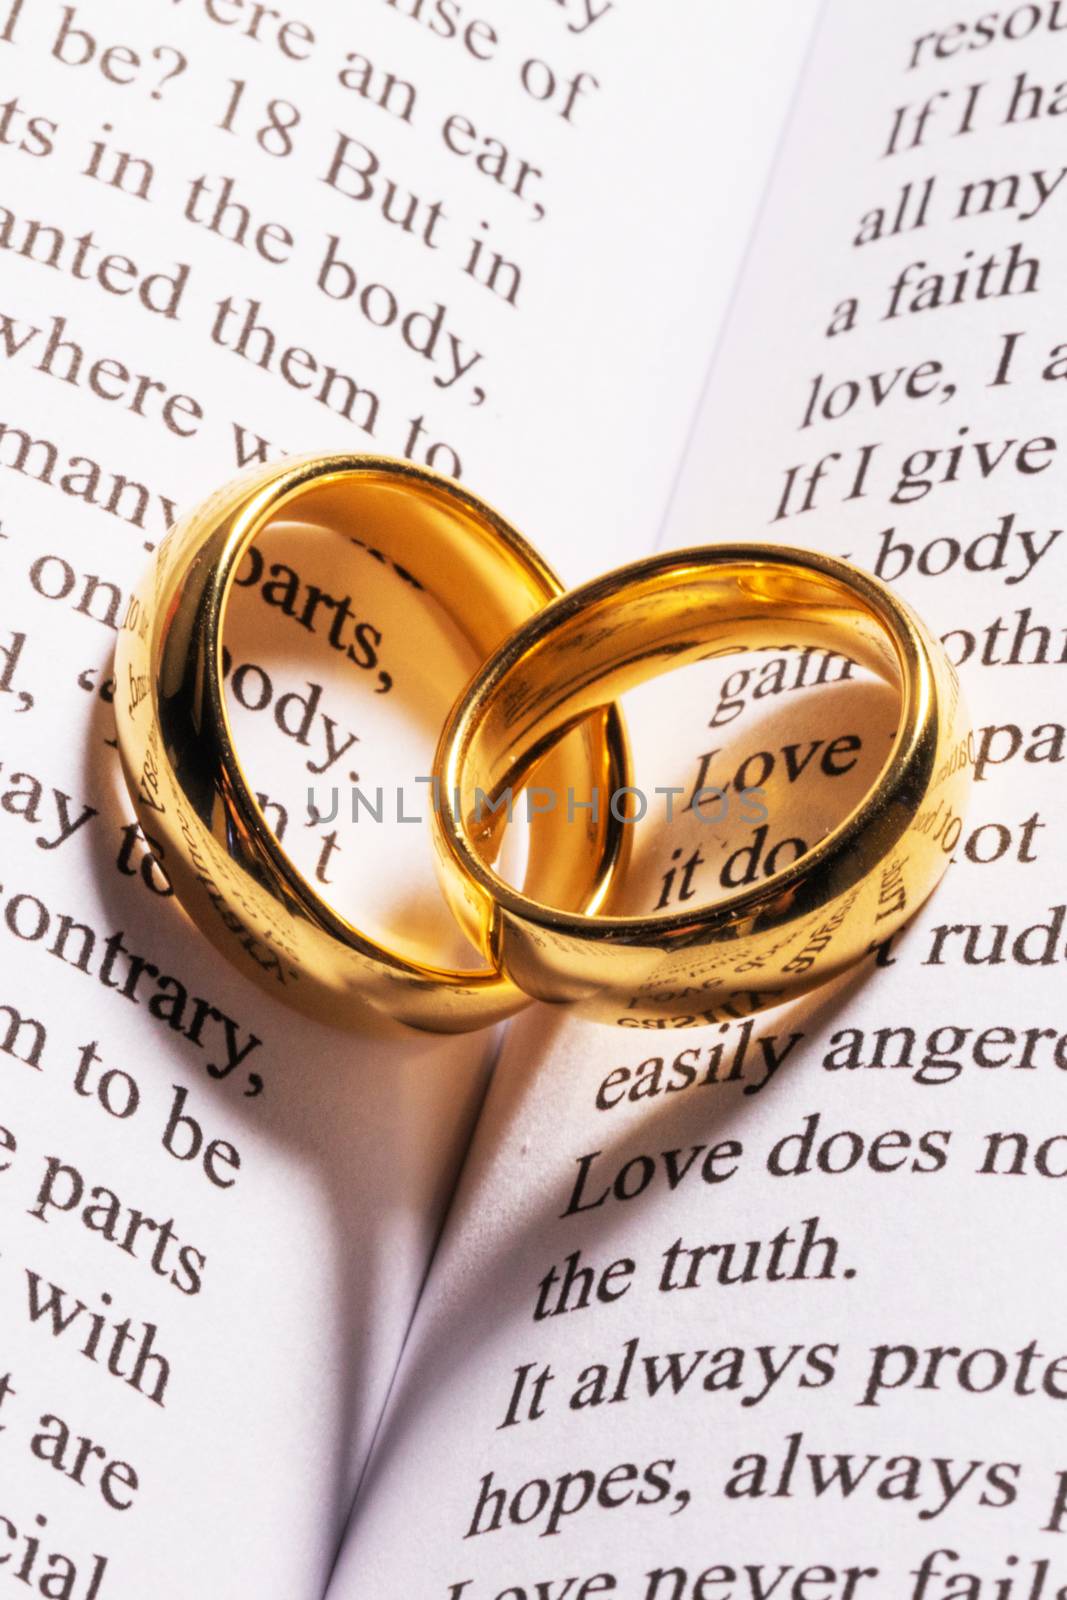 Golden wedding rings on bible book by Yellowj